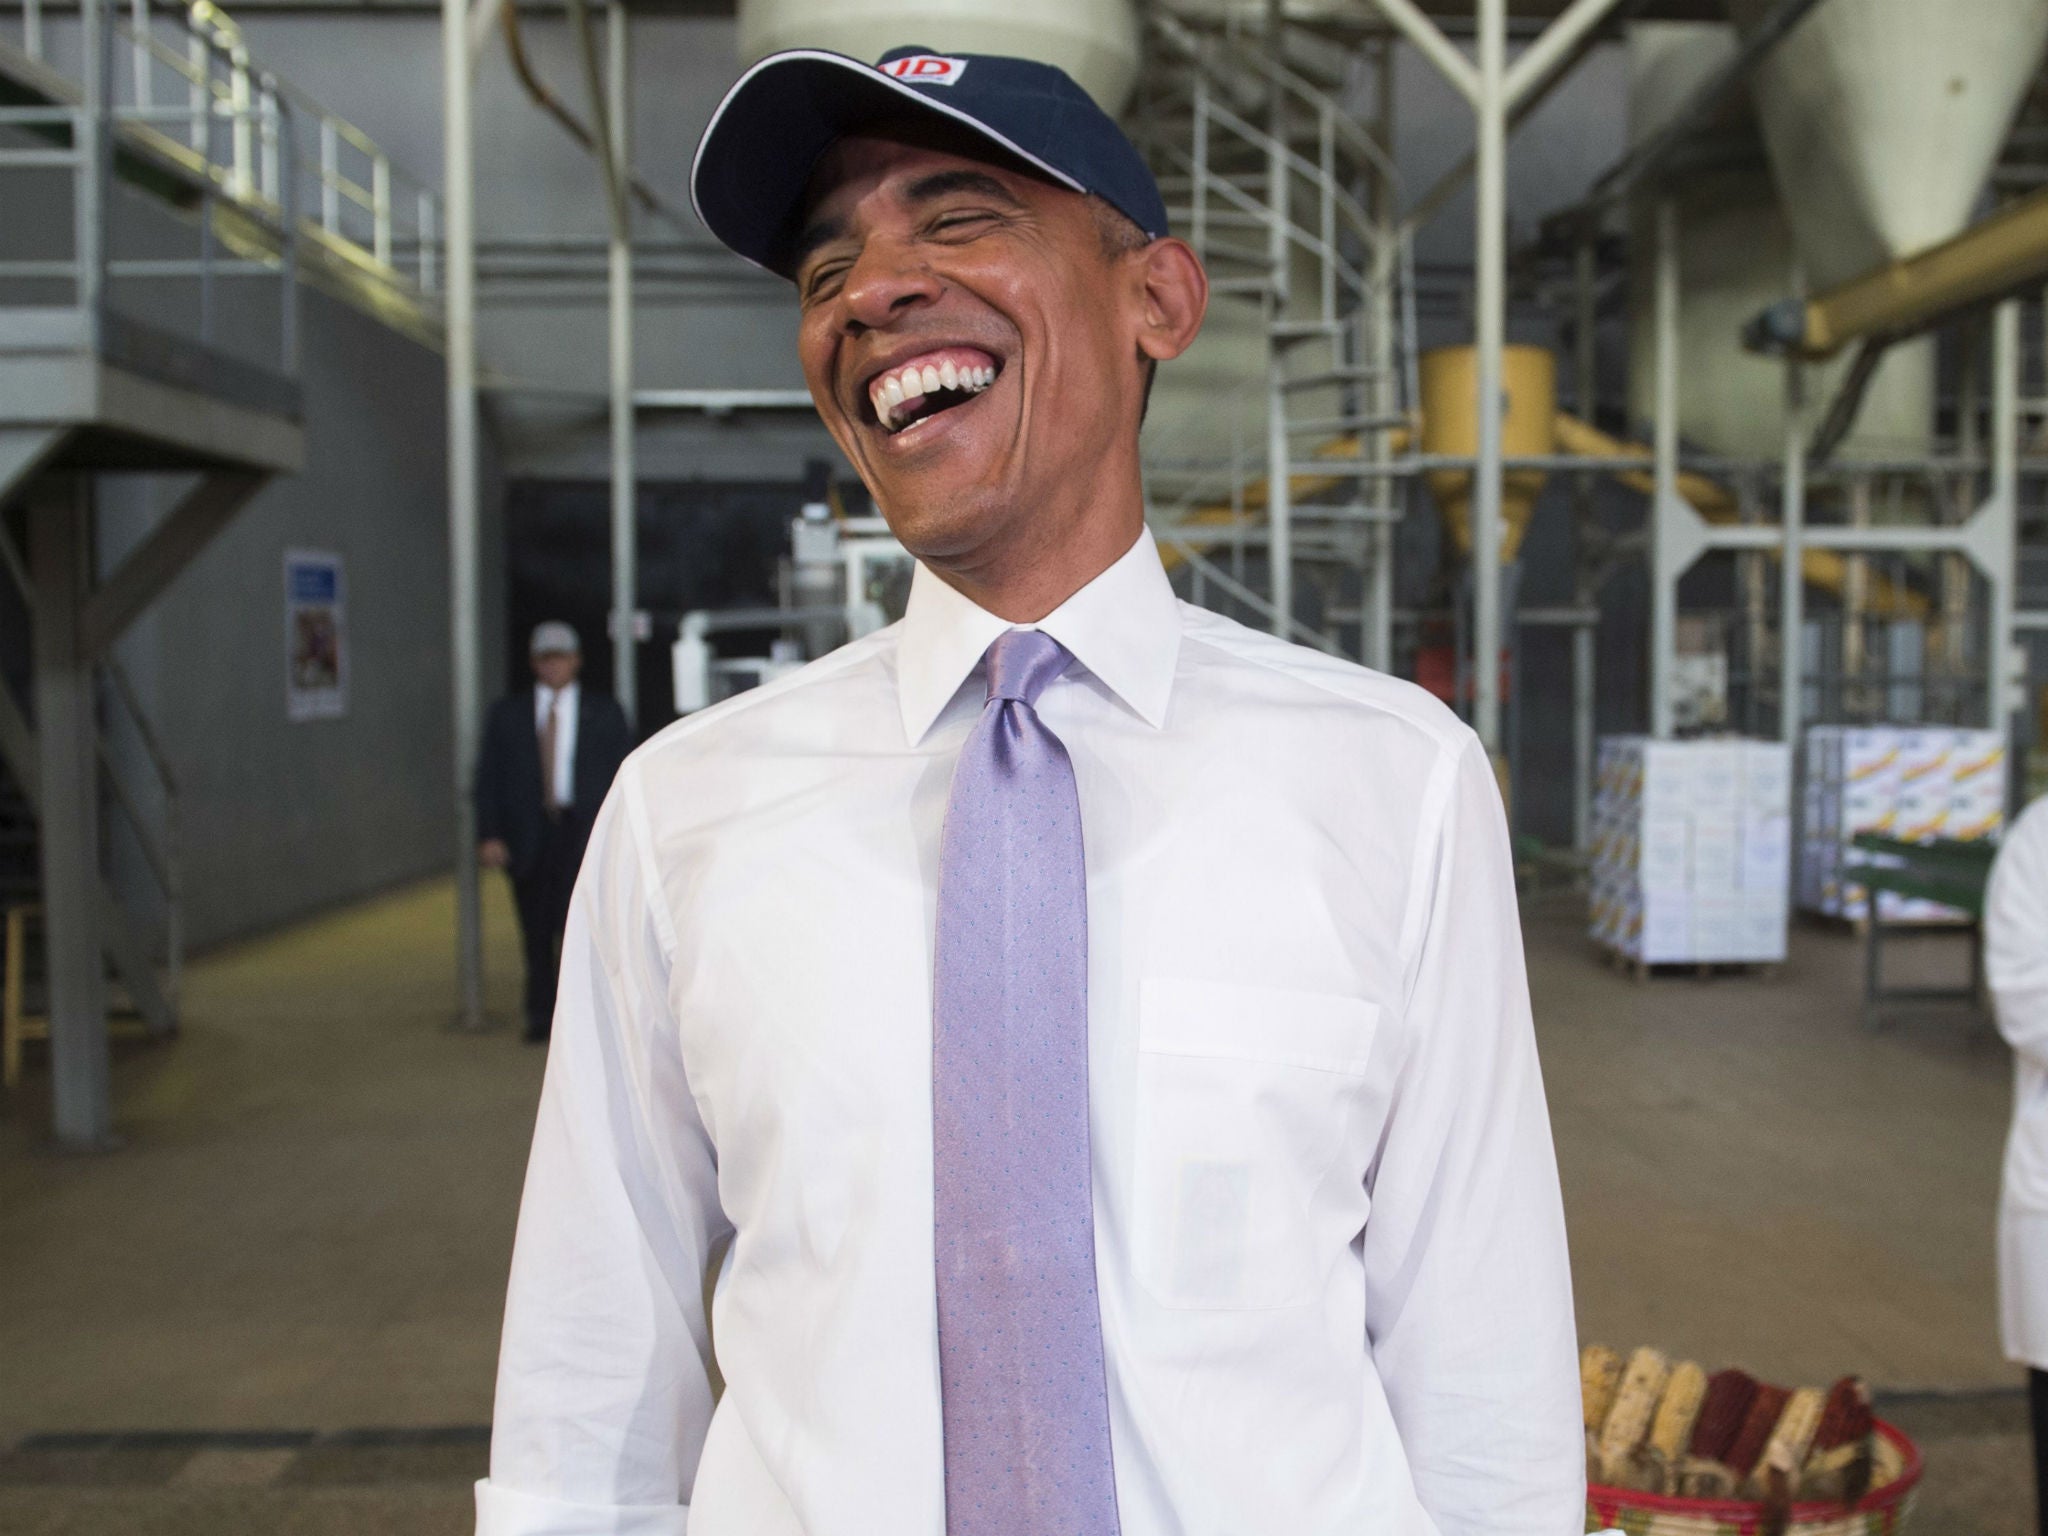 Obama laughed at hair nets members of the press had to wear during a tour of a factory in Ethiopia